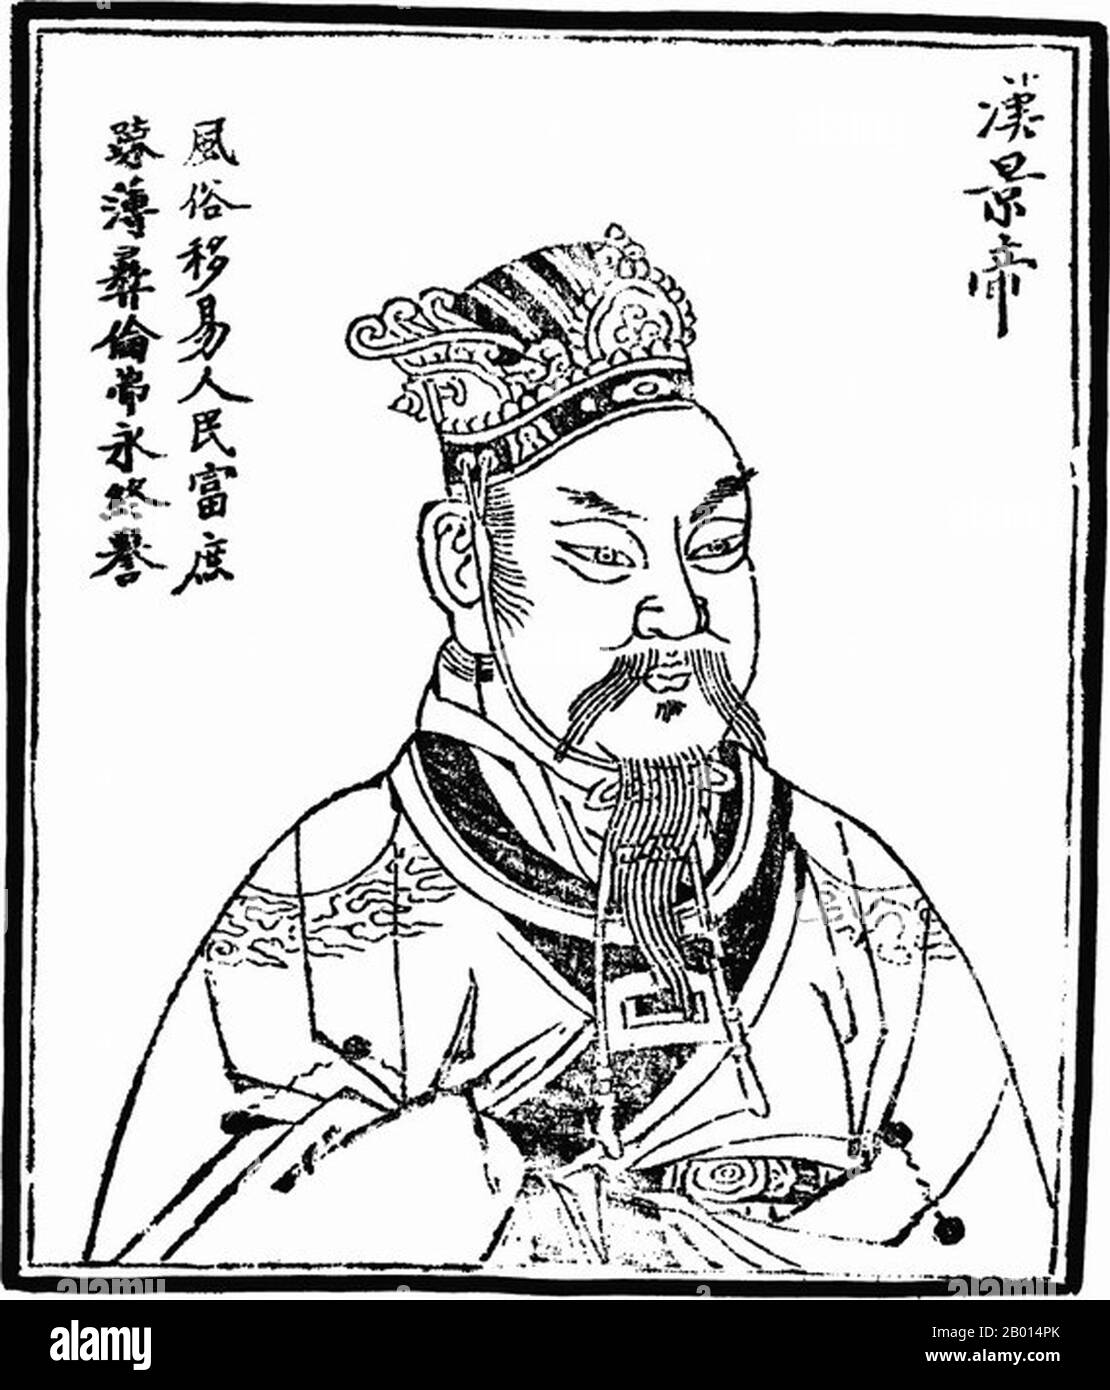 China: Emperor Jingdi (188-  9 March 141 BCE), sixth emperor of the Western Han Dynasty (r.156-141 BCE). Illustration, c. 1498.  Emperor Jing of Han, personal name Liu Qi, was an emperor of the Han Dynasty. His reign saw the curtailment of the power of feudal princes, leading to the Rebellion of the Seven States in 154 BCE. Emperor Jing managed to defeat the revolt and princes were thereafter denied rights to appoint ministers for their own fiefs. This move consolidated central power, paving the way for the glorious and long reign of his son Emperor Wu of Han. Stock Photo